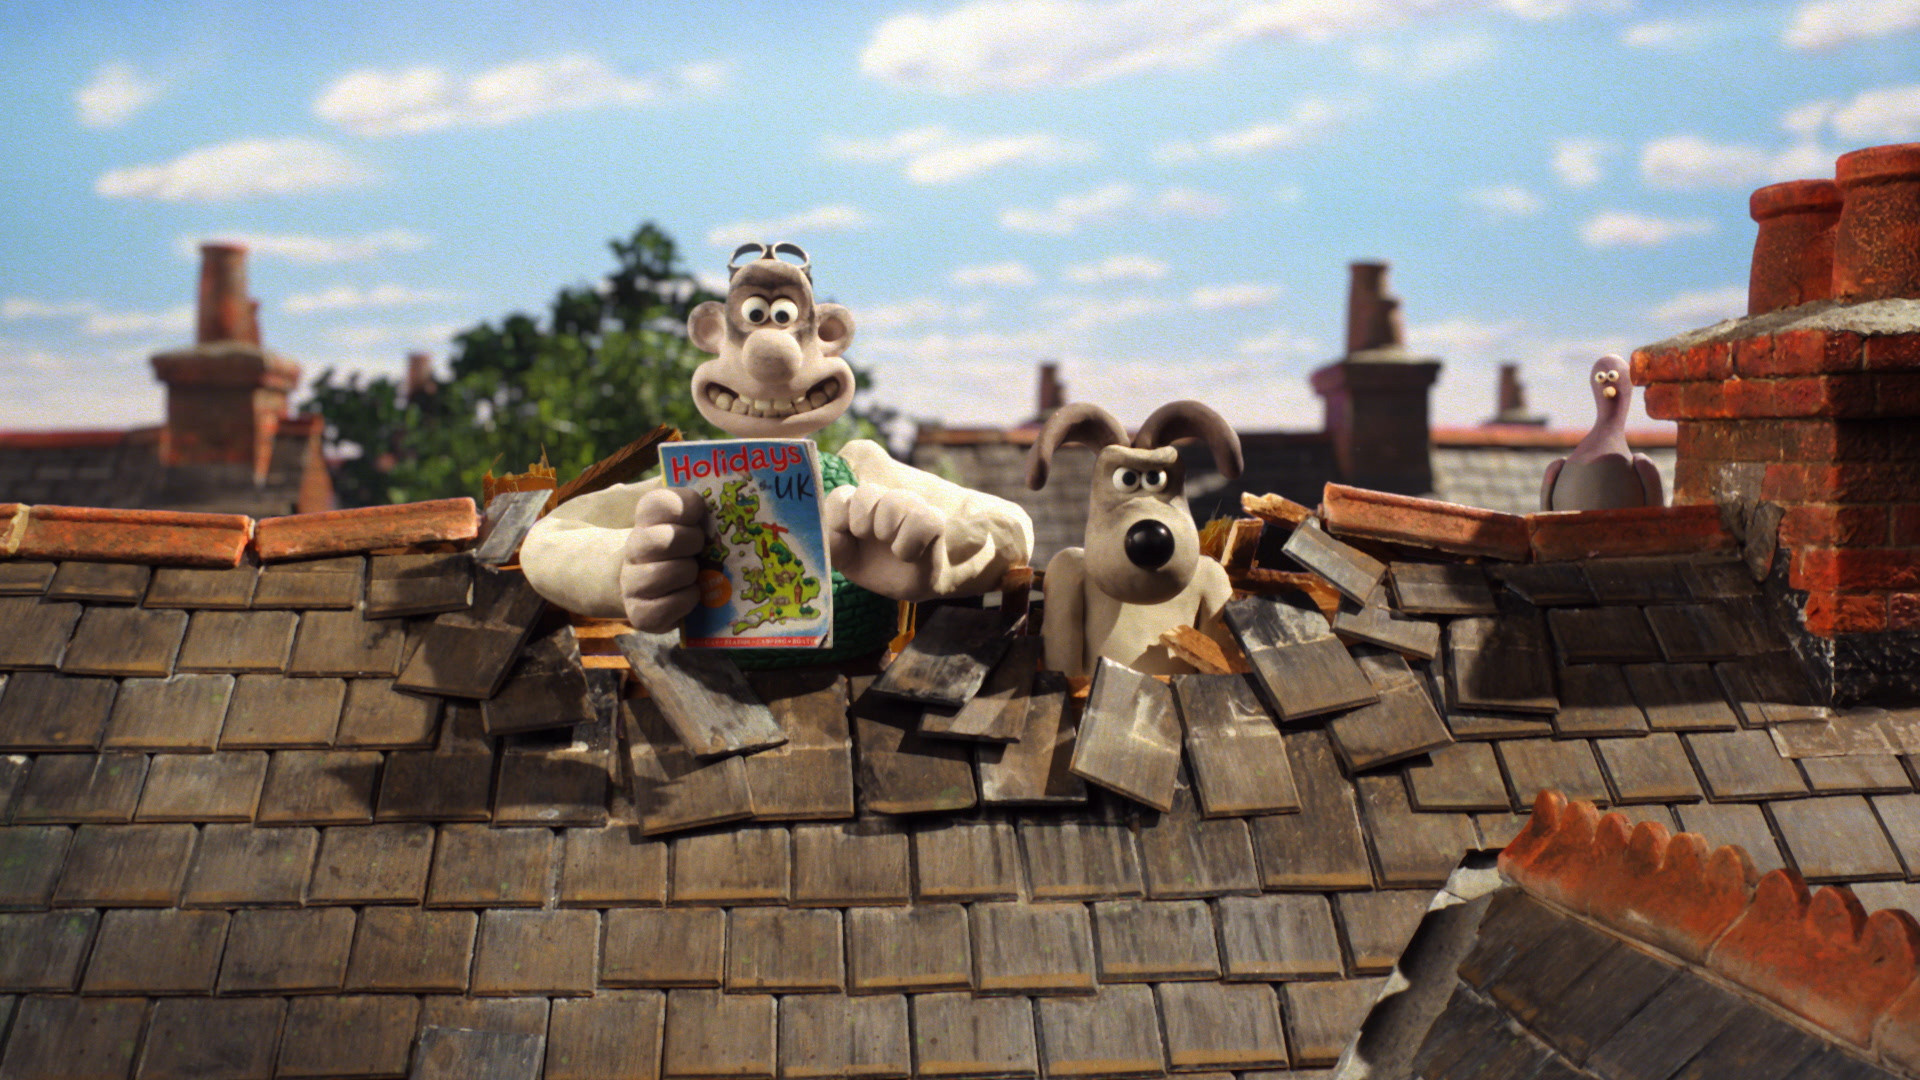 Data Src Full Size Wallace And Gromit Wallpaper 1080p And Gromit Holiday HD Wallpaper